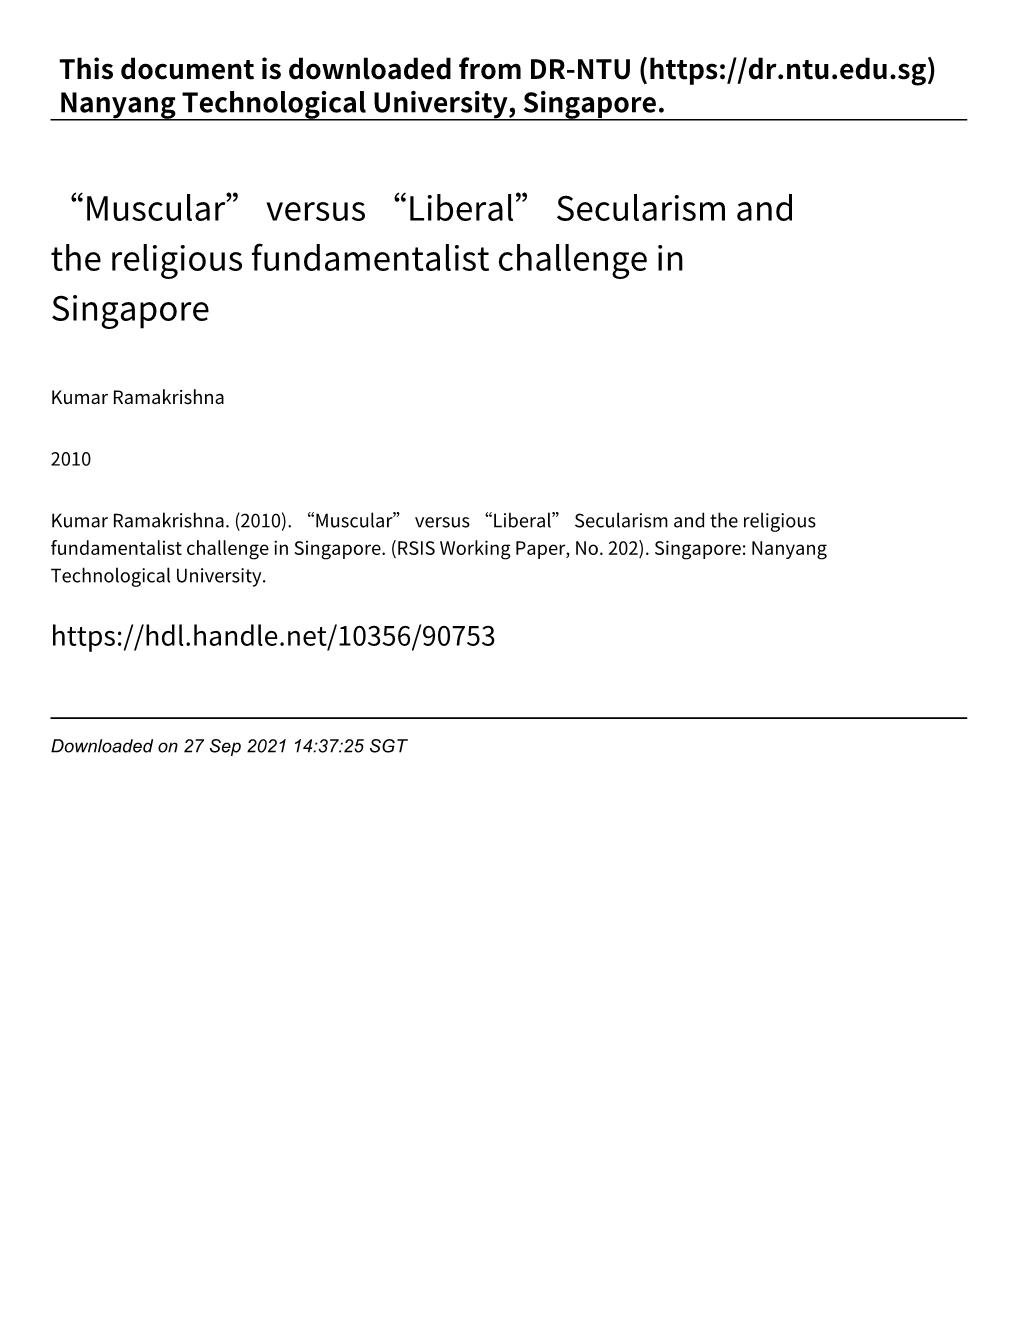 Secularism and the Religious Fundamentalist Challenge in Singapore